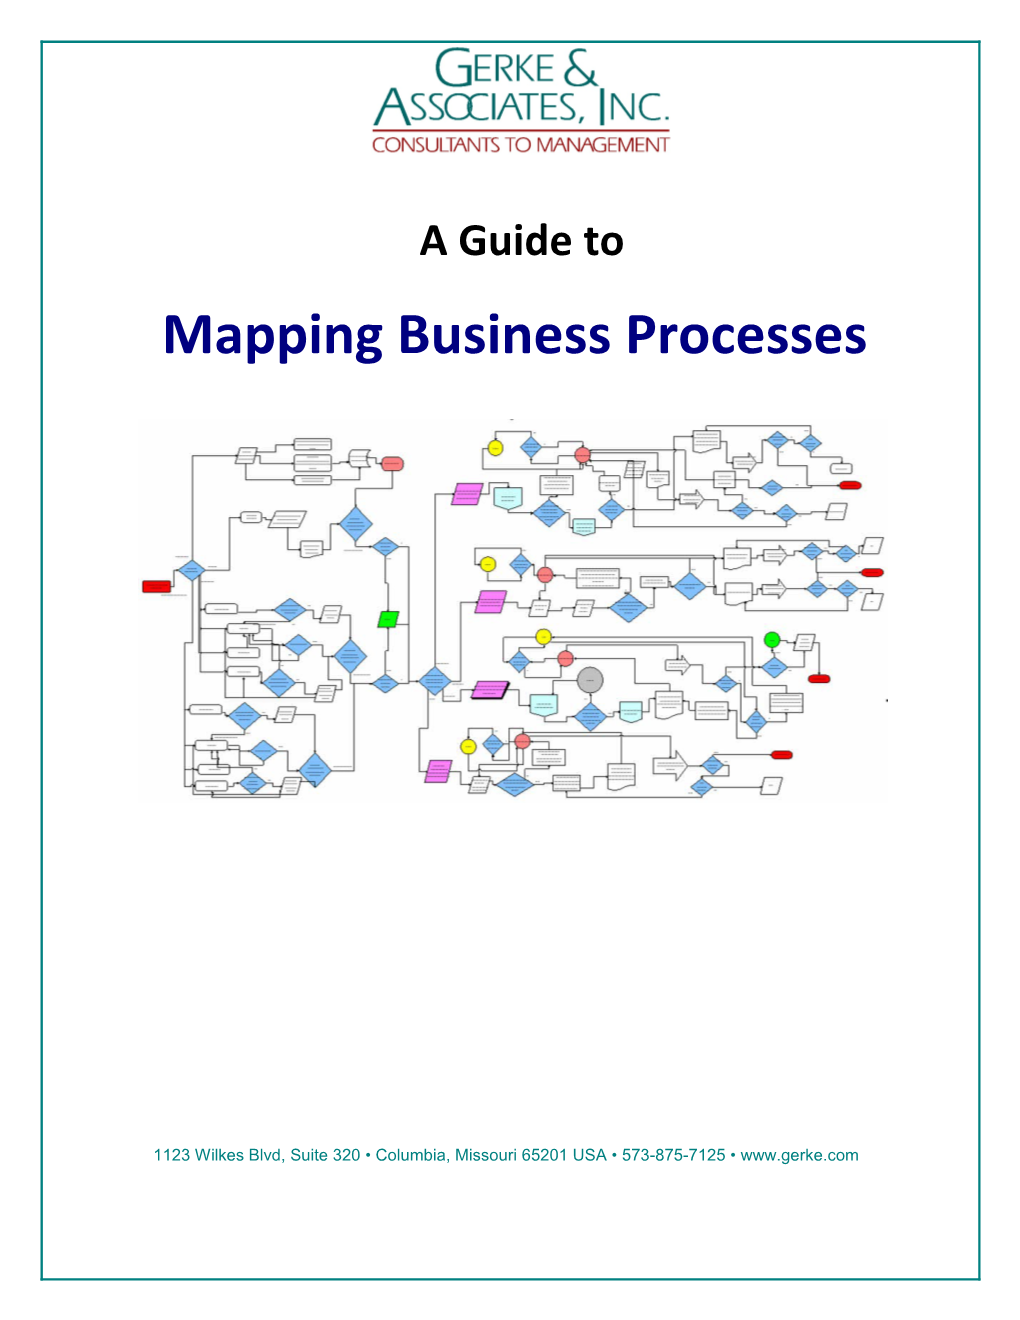 Mapping Business Processes